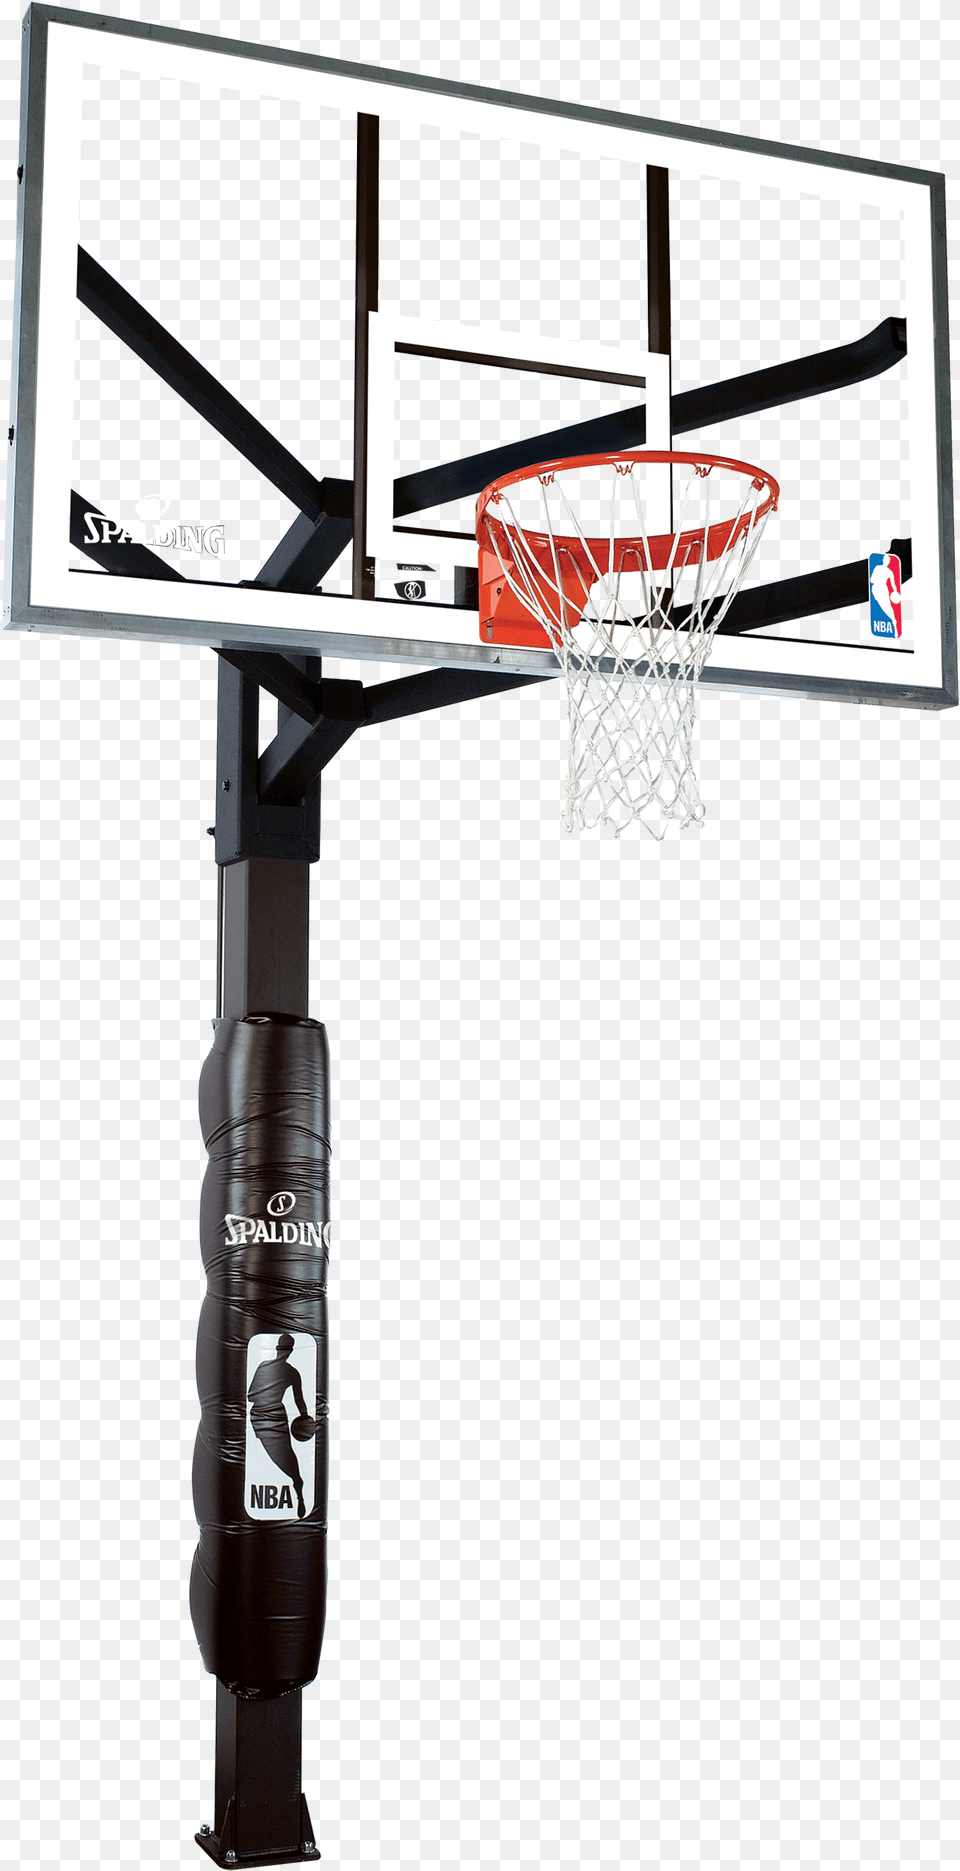 Standard Size Of Basketball Ring And Board, Hoop, Person Png